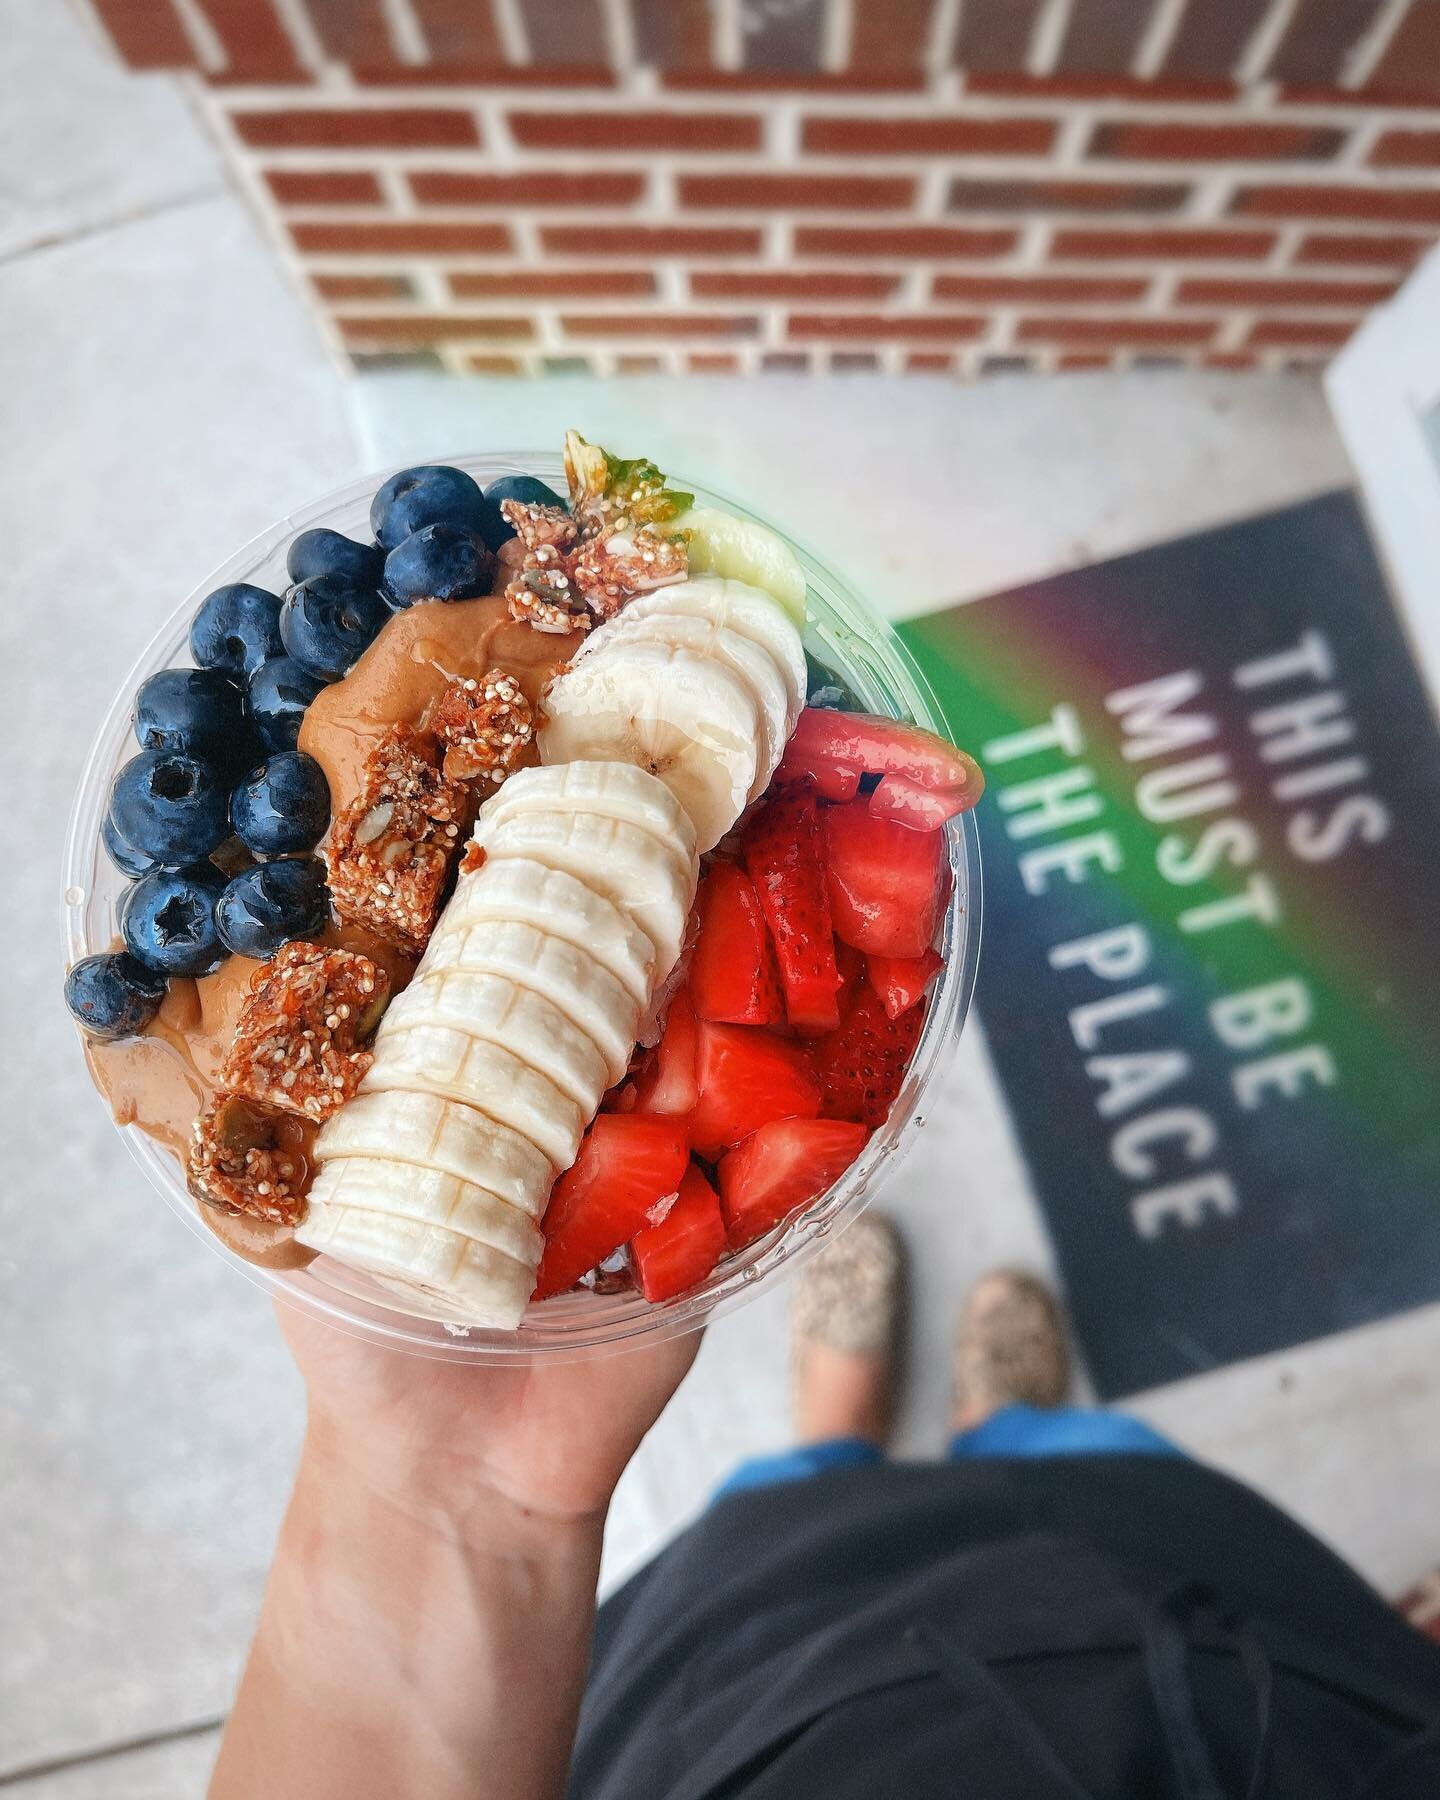 Home, is where I want to be [with an a&ccedil;a&iacute; bowl from Jessie&rsquo;s] 🎶 🍓🫐 #jessiesoflinwood #coffeecreamcommunity #acaibowls
.
.
.

#coffee #cafe #coffeeshop #lacolombe #lcservedhere #coldbrew #cappuccino #latte #acai #icecream #vegan